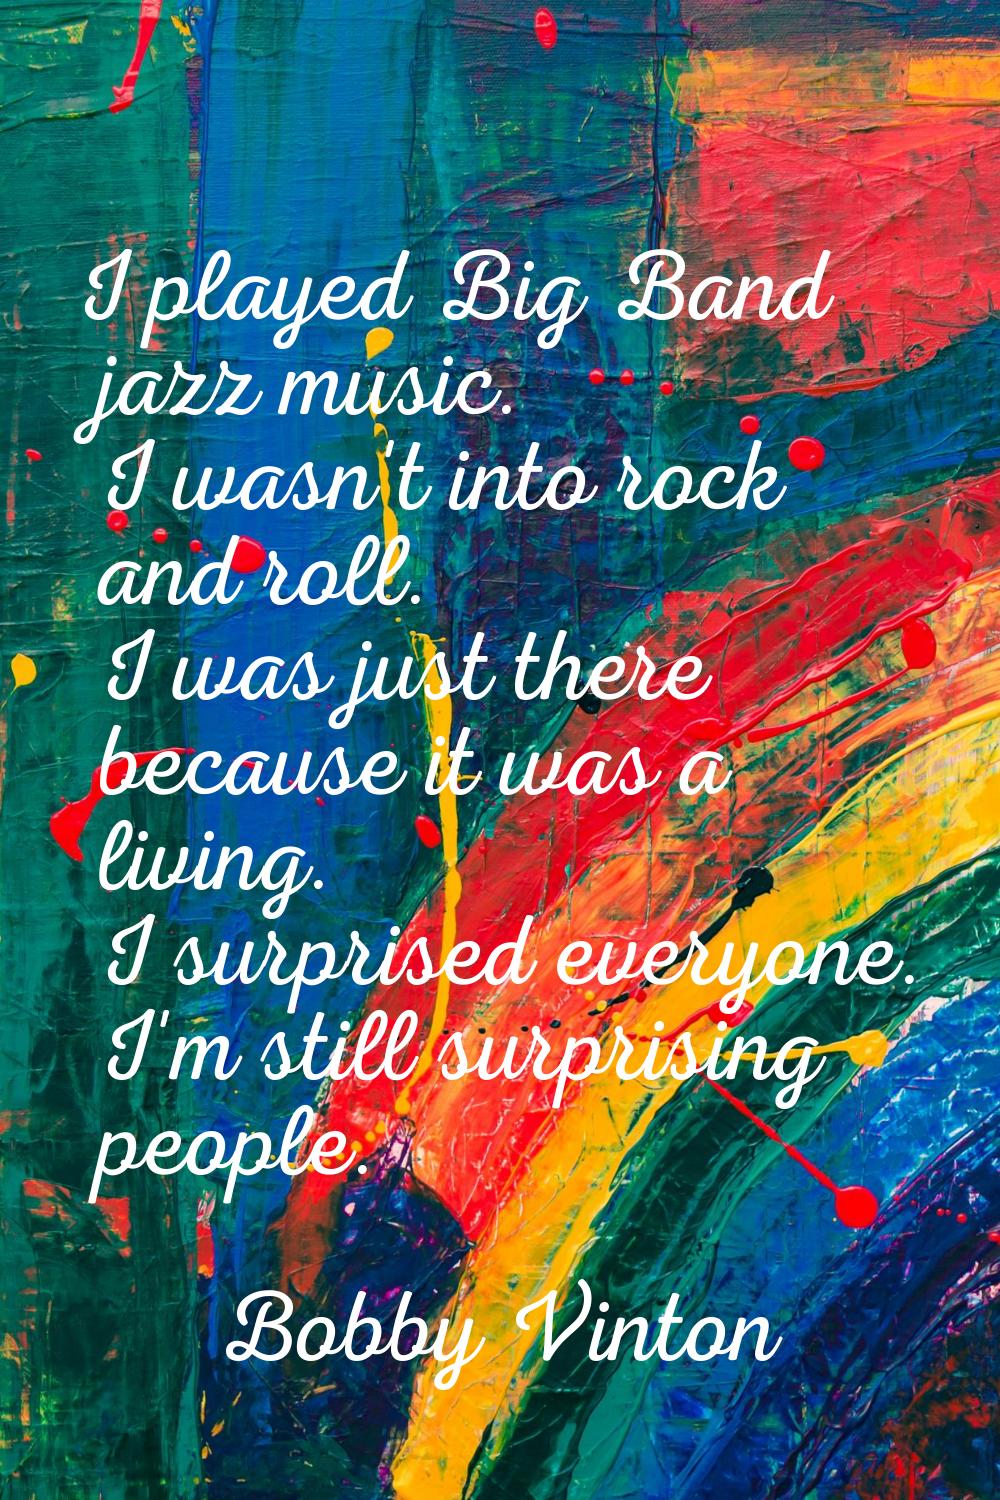 I played Big Band jazz music. I wasn't into rock and roll. I was just there because it was a living